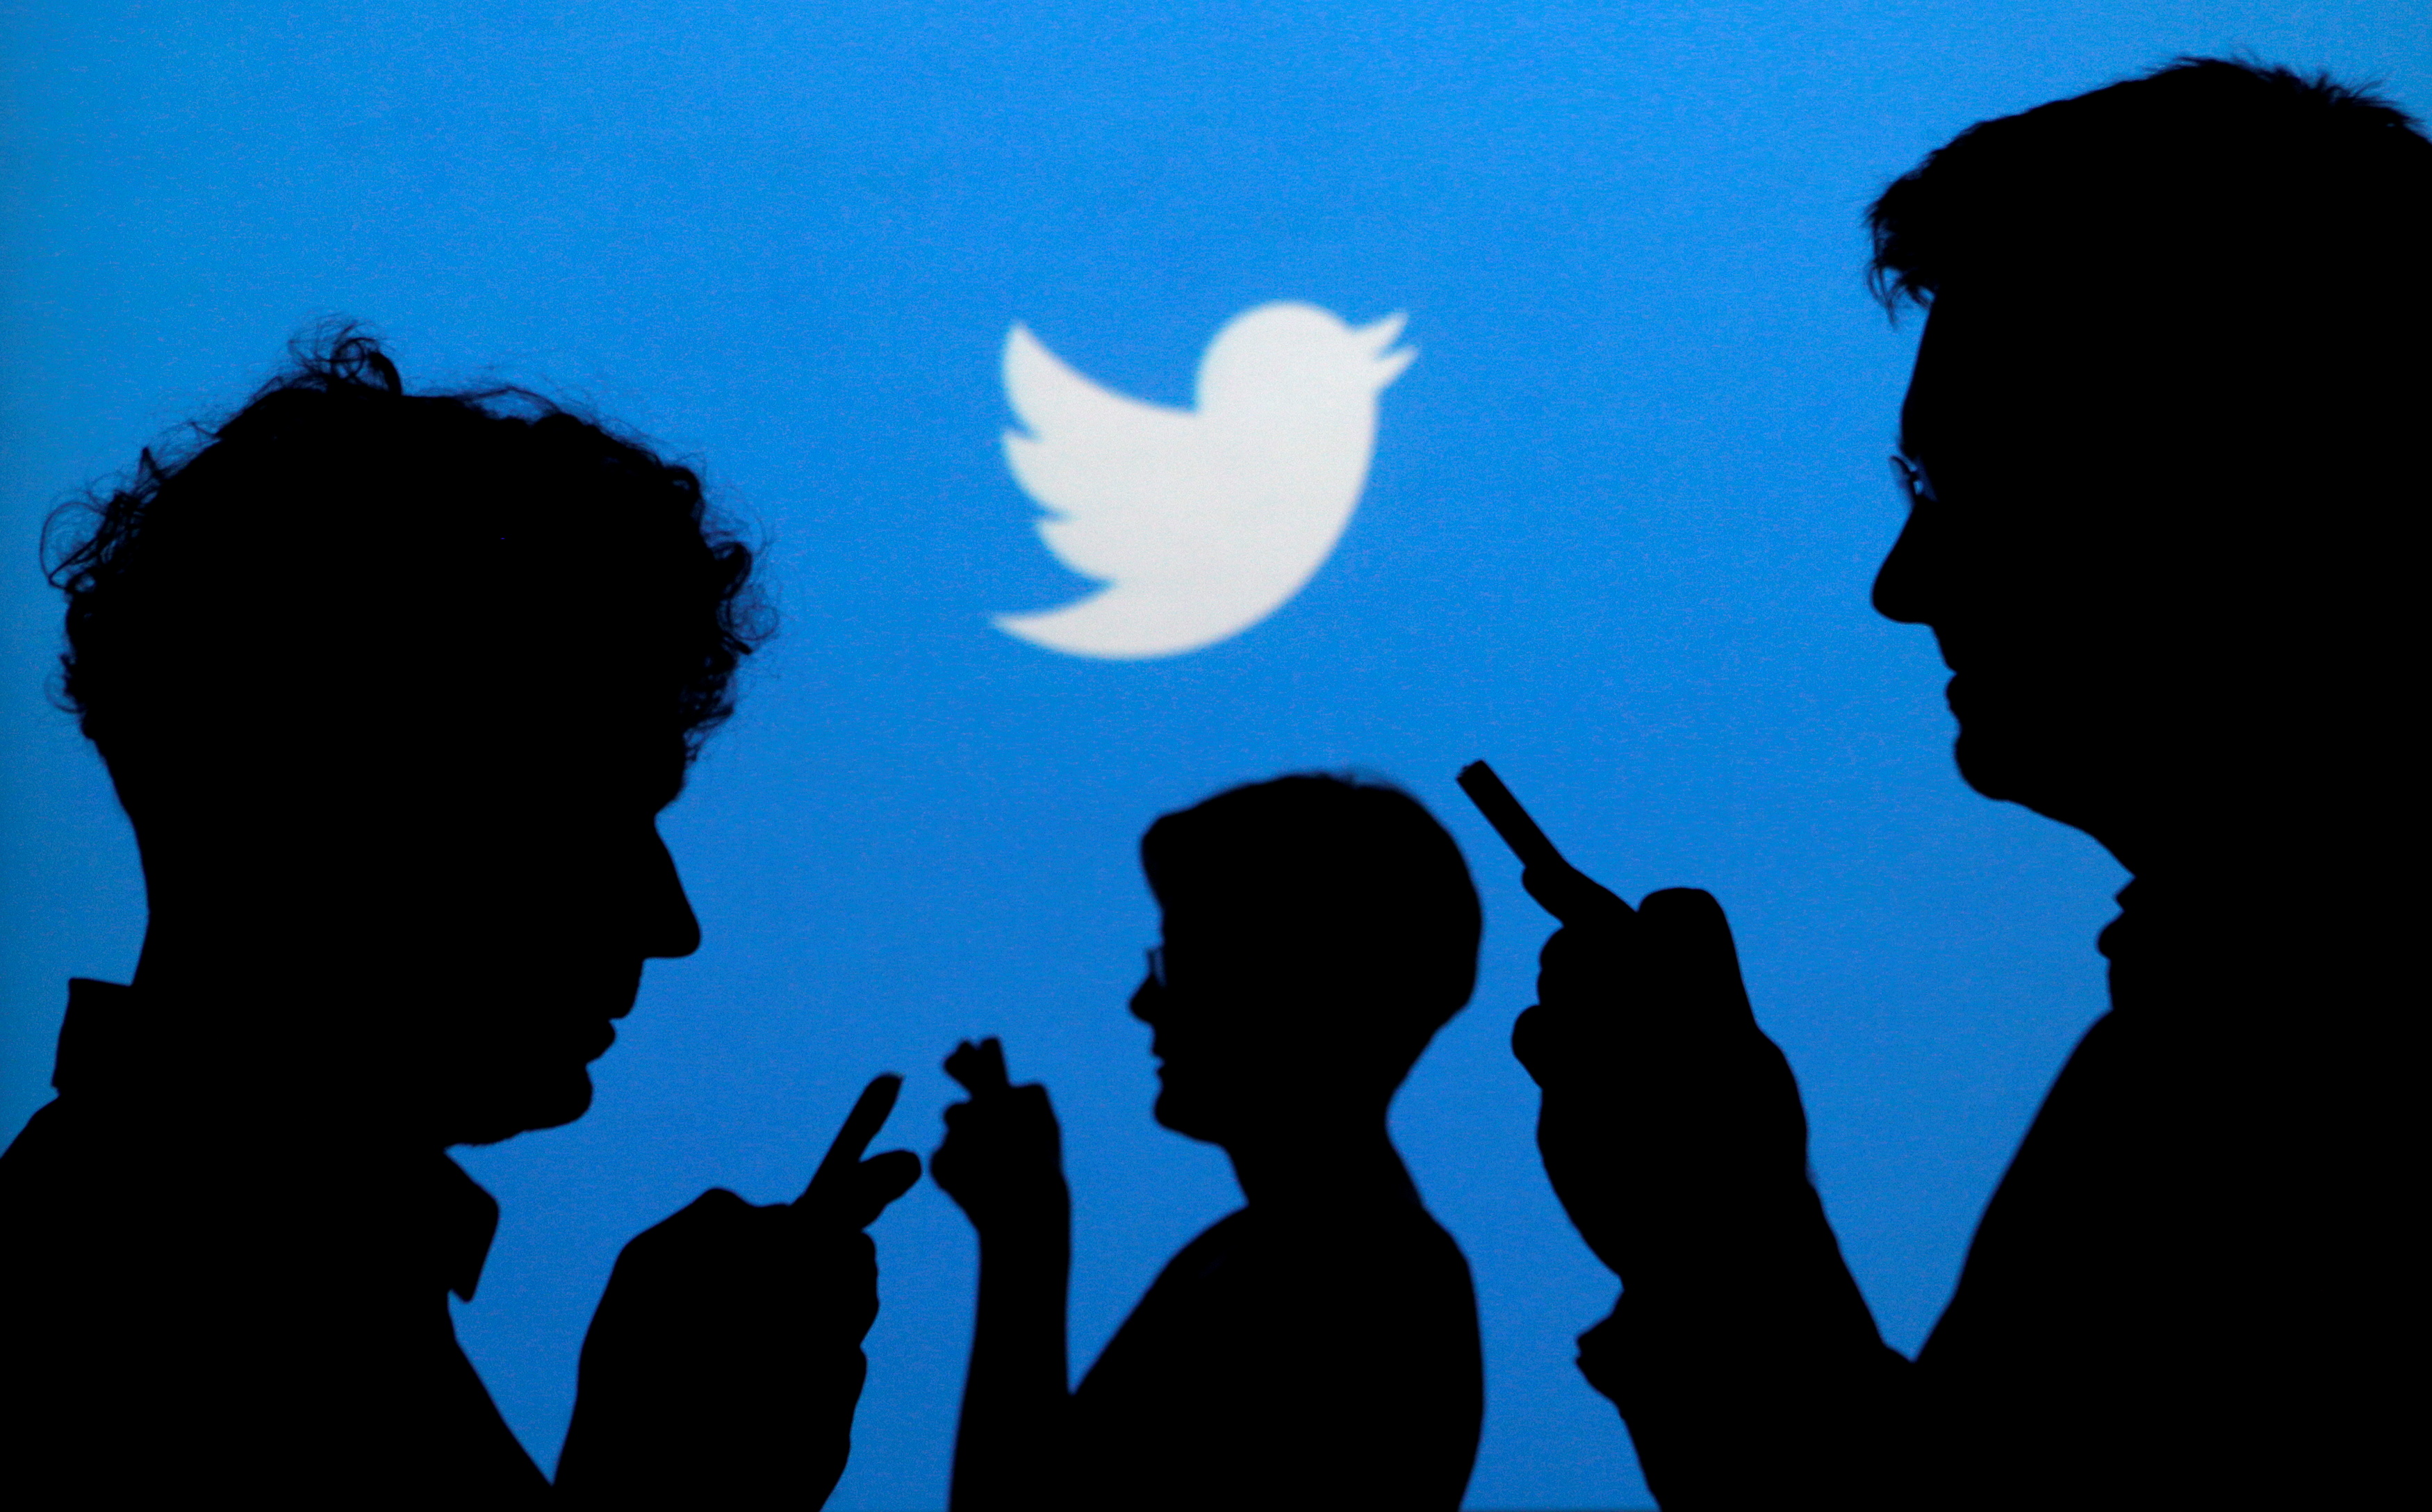 FILE PHOTO: People holding mobile phones are silhouetted against a backdrop projected with the Twitter logo  in Warsaw